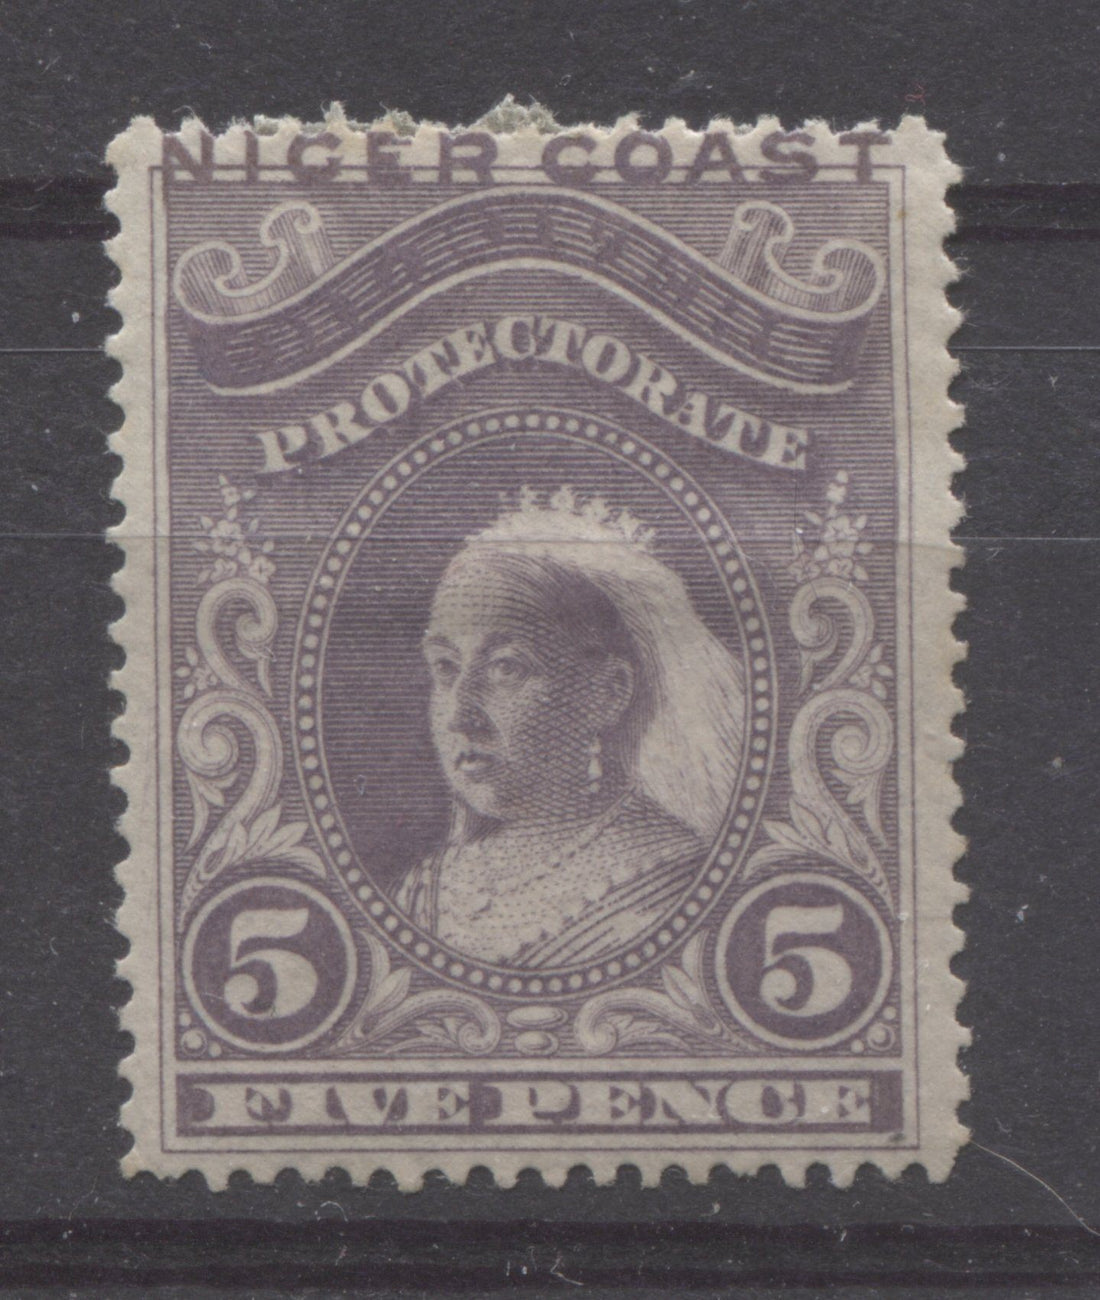 The Unwatermarked Queen Victoria Waterlow Issue of Niger Coast Protectorate Part Eight